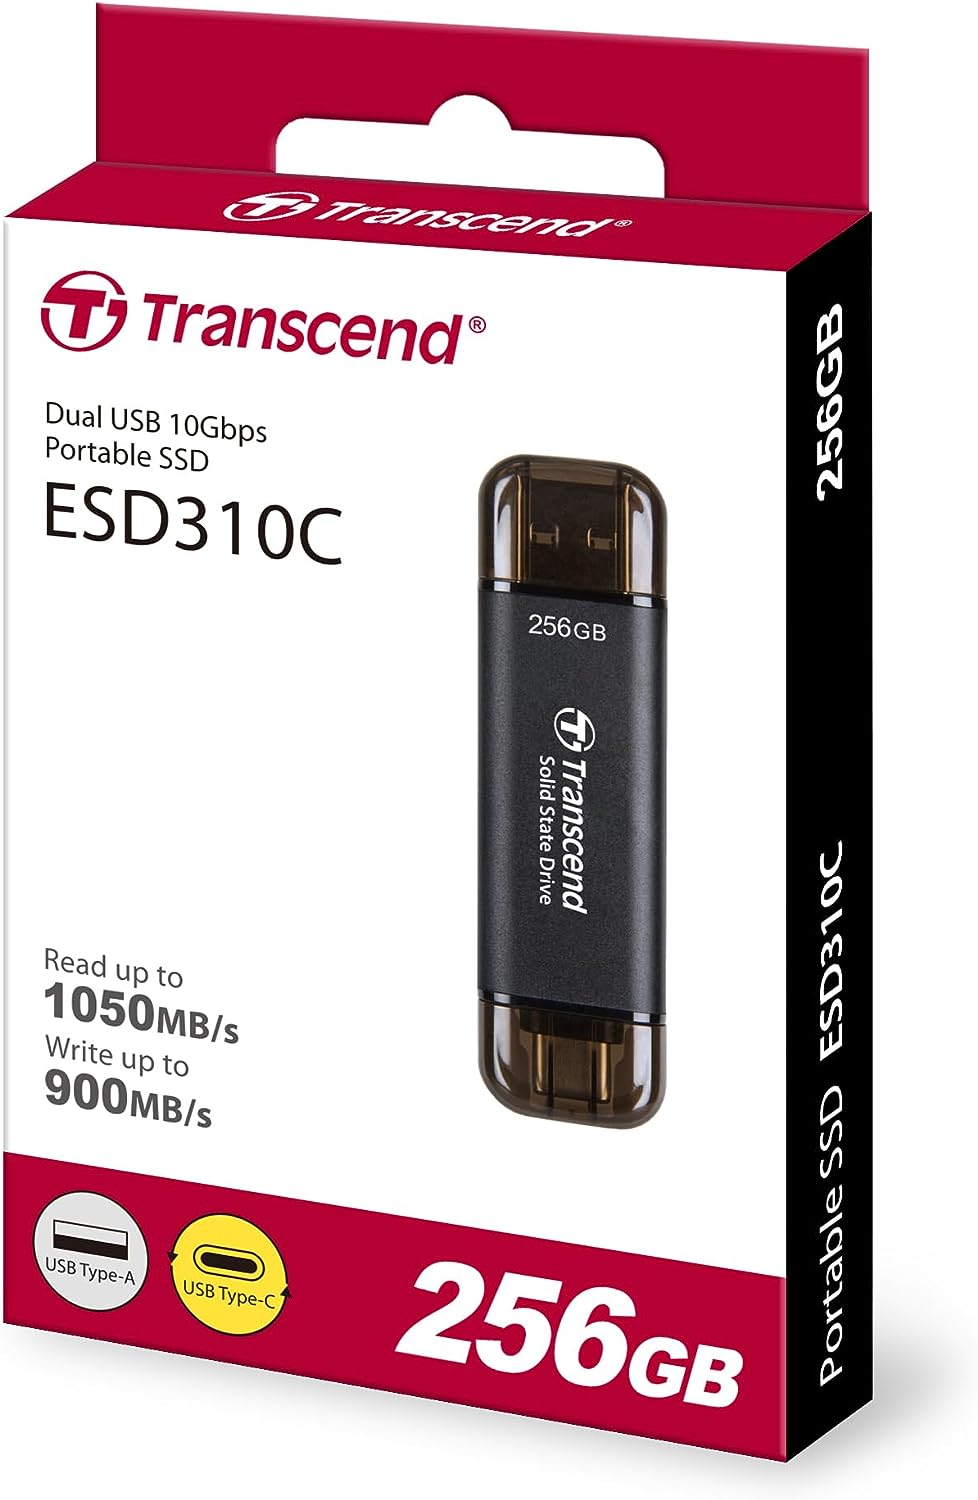 Transcend 256GB USB 10Gbps with Type-C and Type-A  Portable SSD External Hard Drive (Brand New)